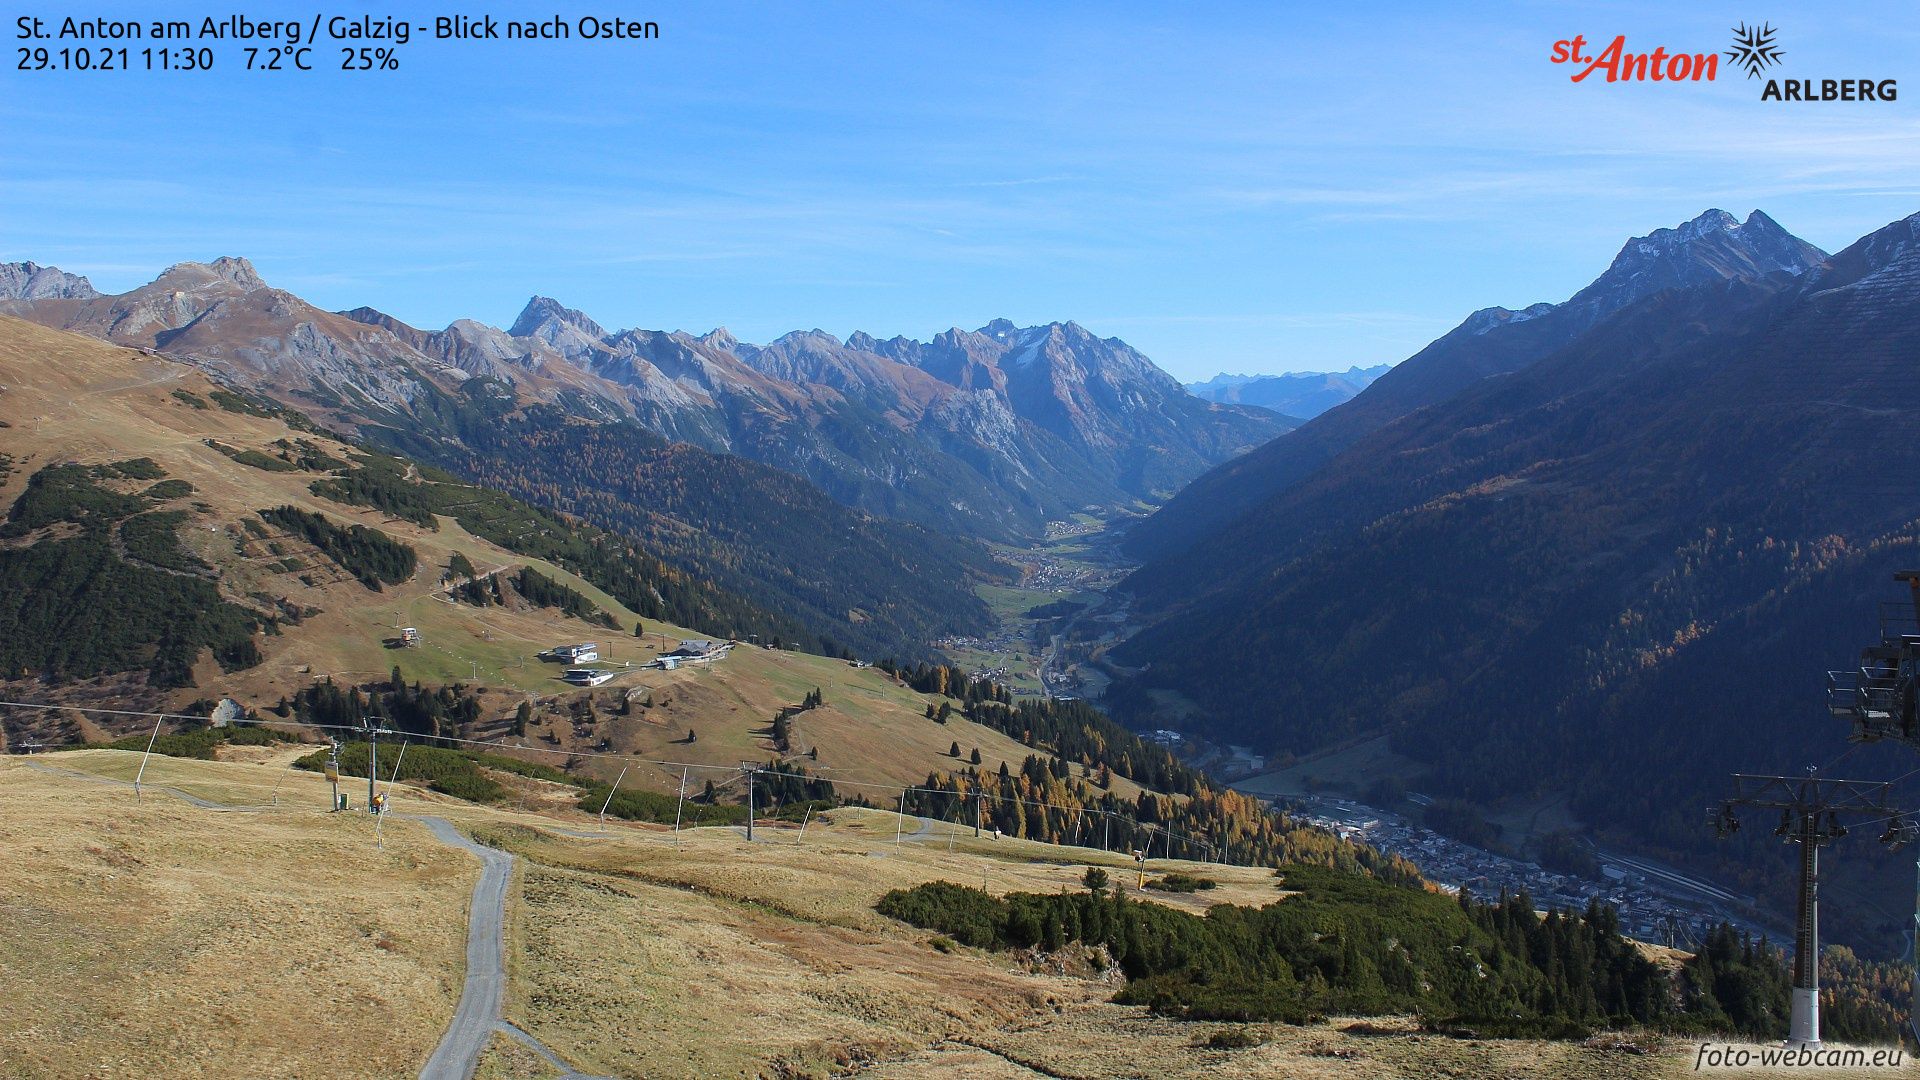 Warm and fairly sunny autumn conditions in Sankt Anton this weekend (foto-webcam.eu)